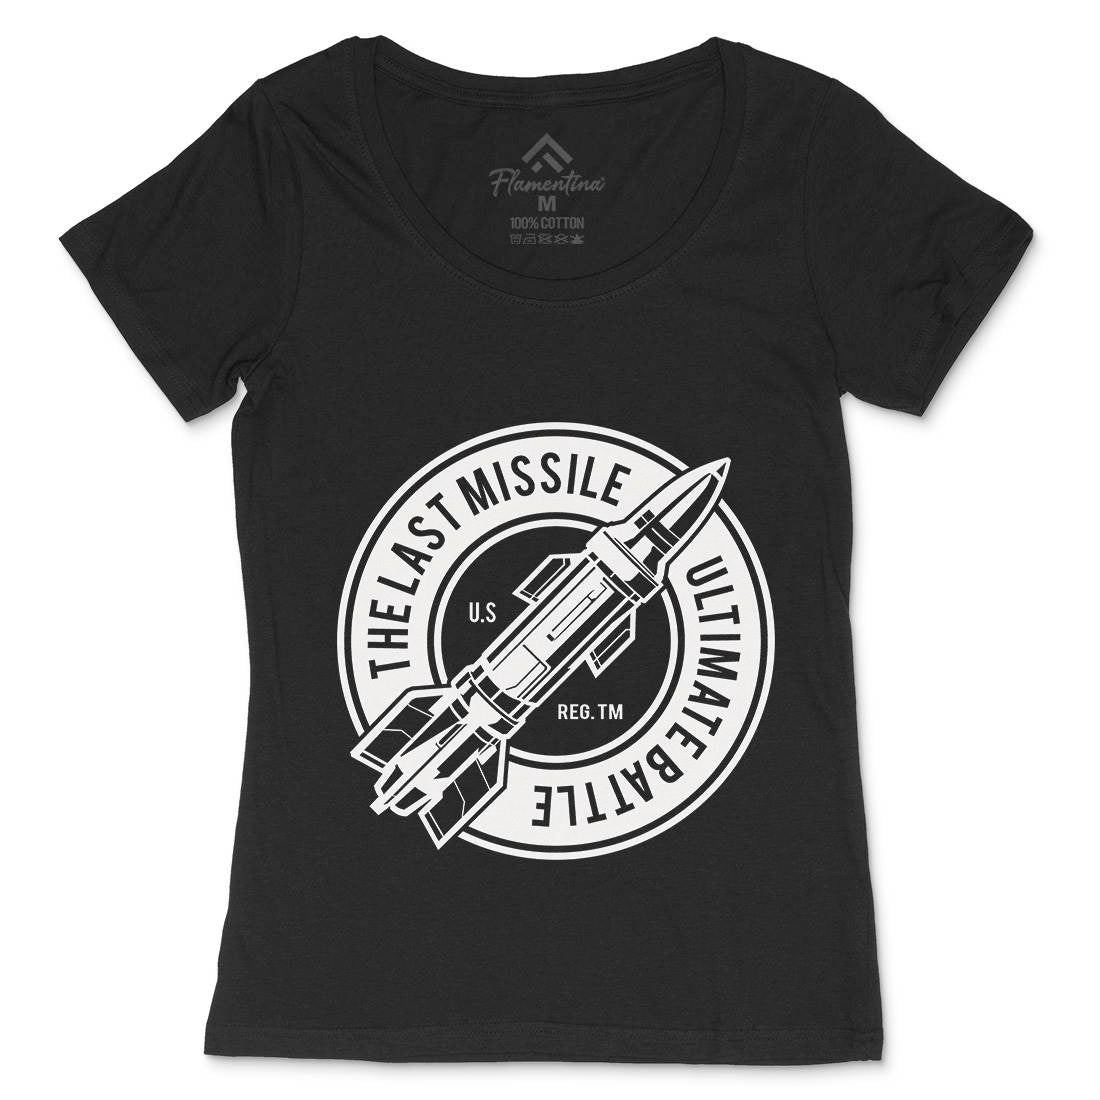 Last Missile Womens Scoop Neck T-Shirt Army A175